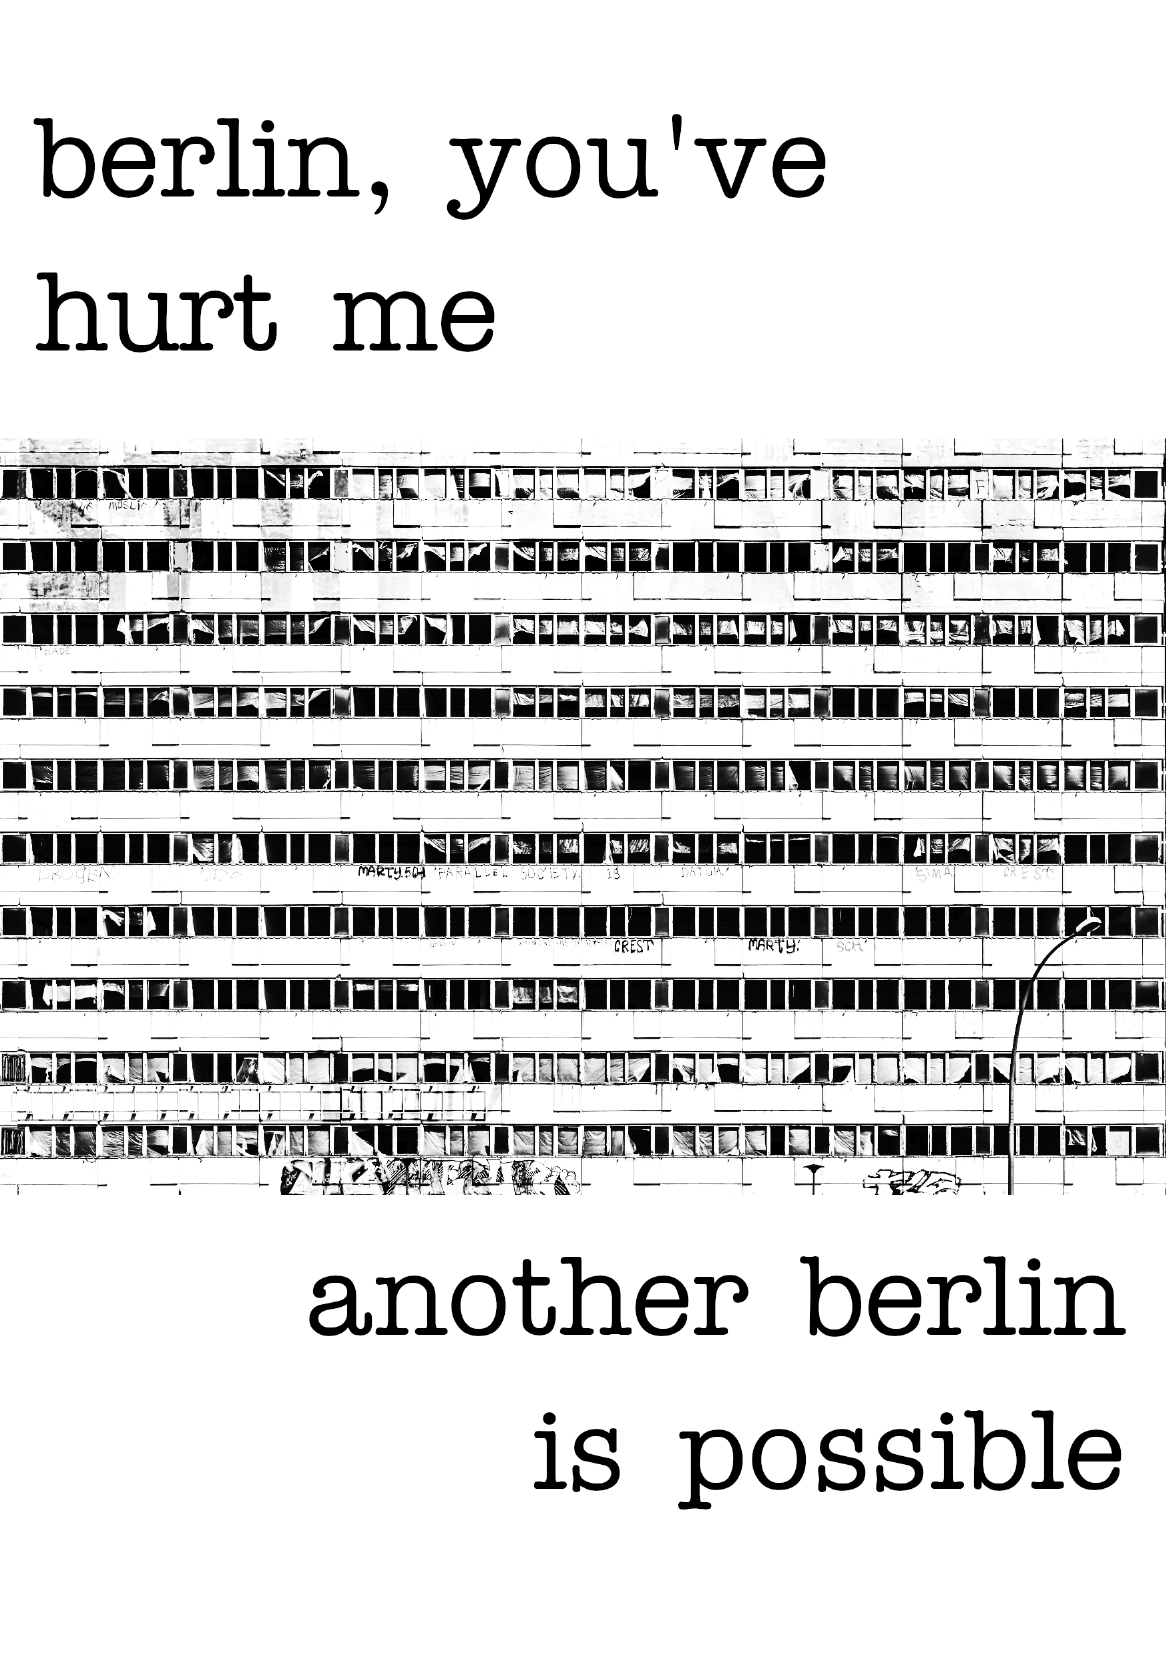 s-c-scrappy-capy-distro-berlin-you-ve-hurt-me-anot-1.png